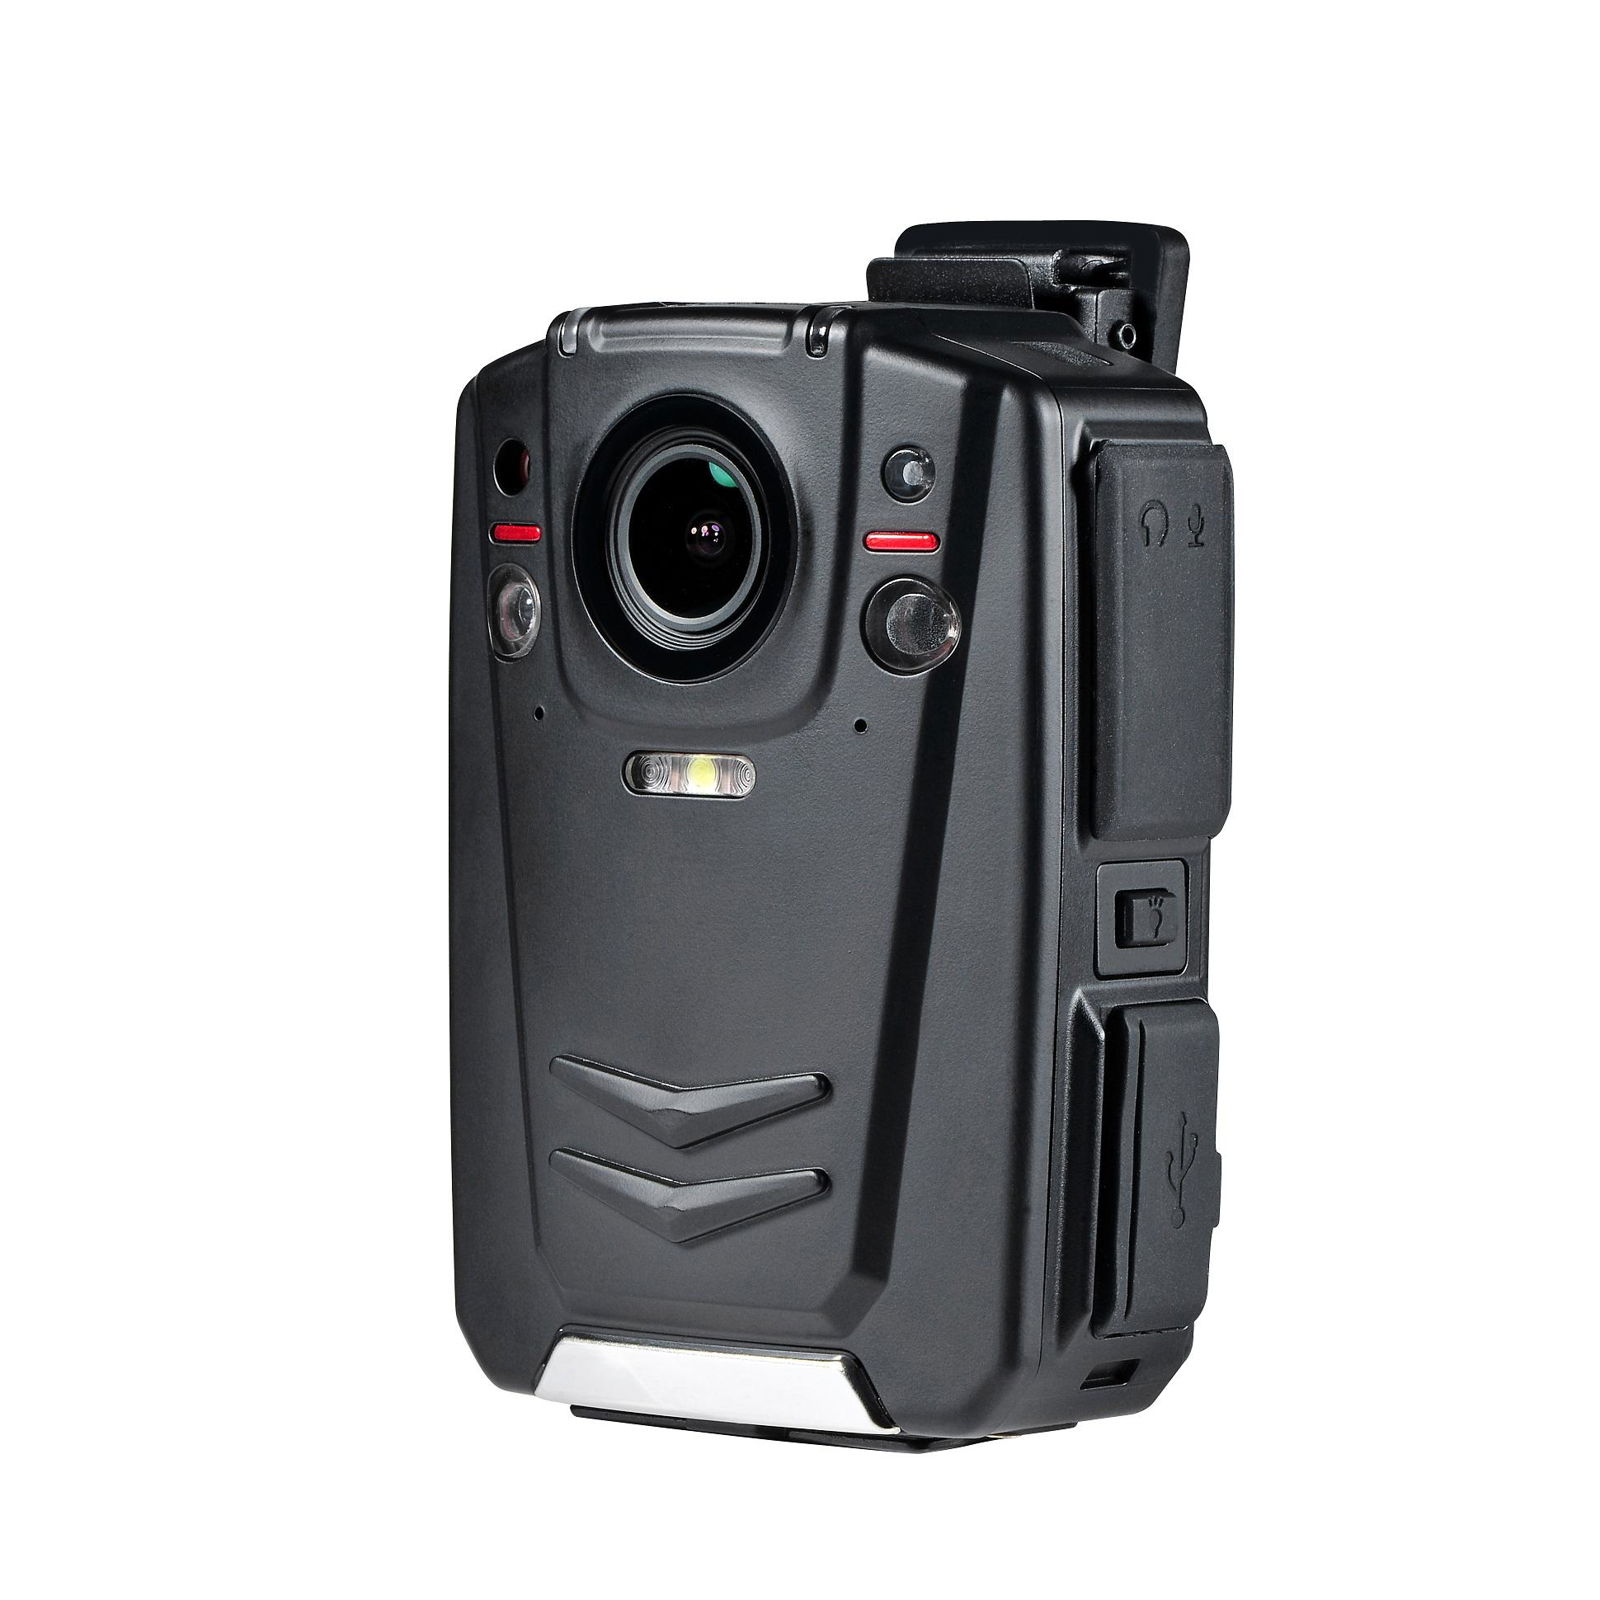 Body worn camera for Police, security guard